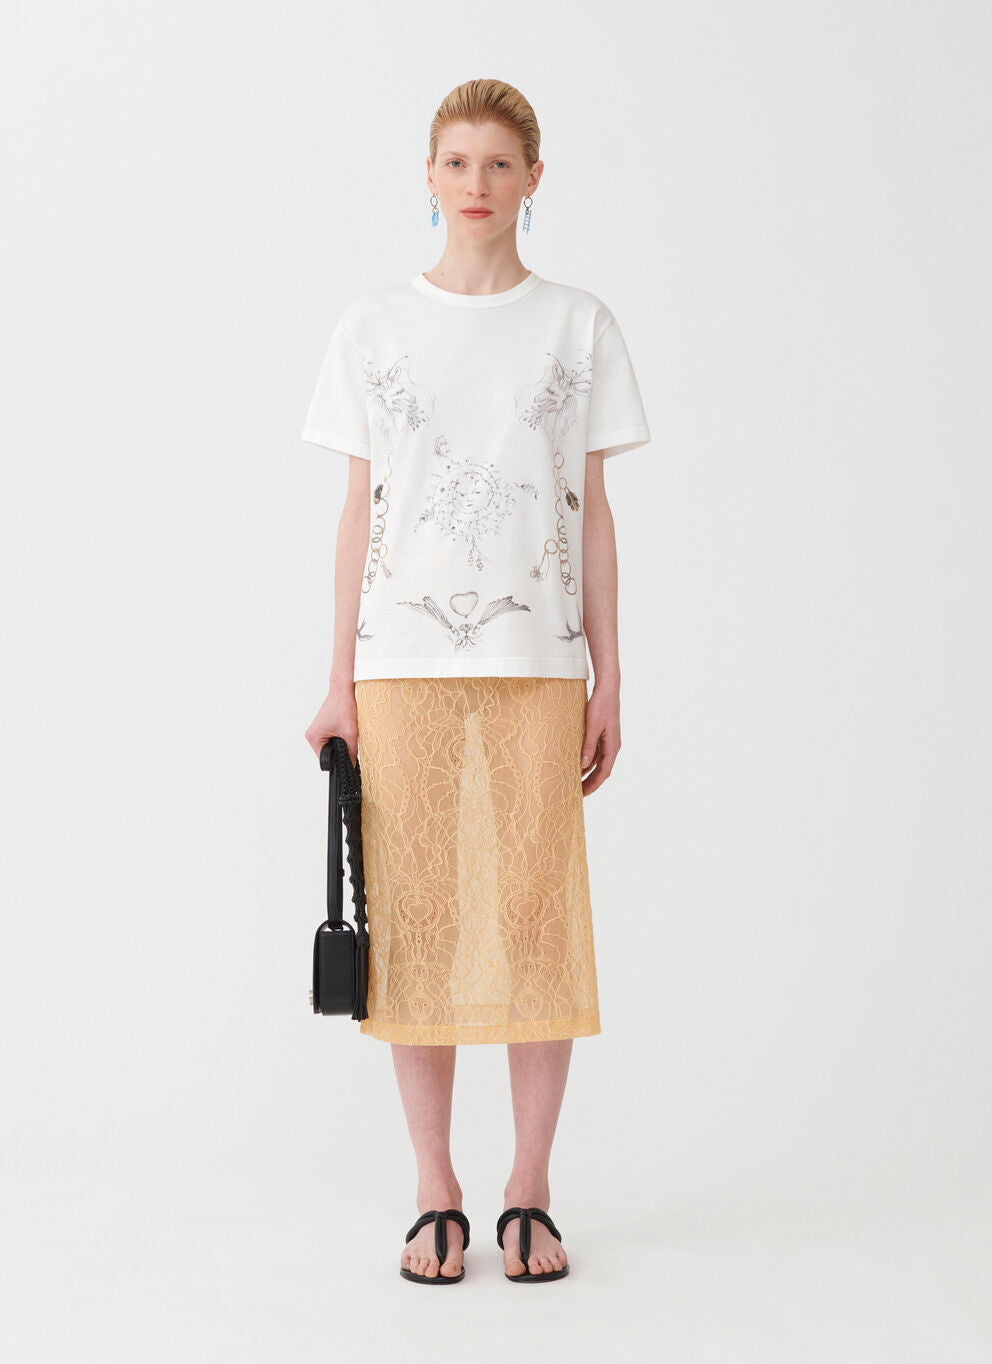 Jersey Delicate  Printed  Cream T-Shirt